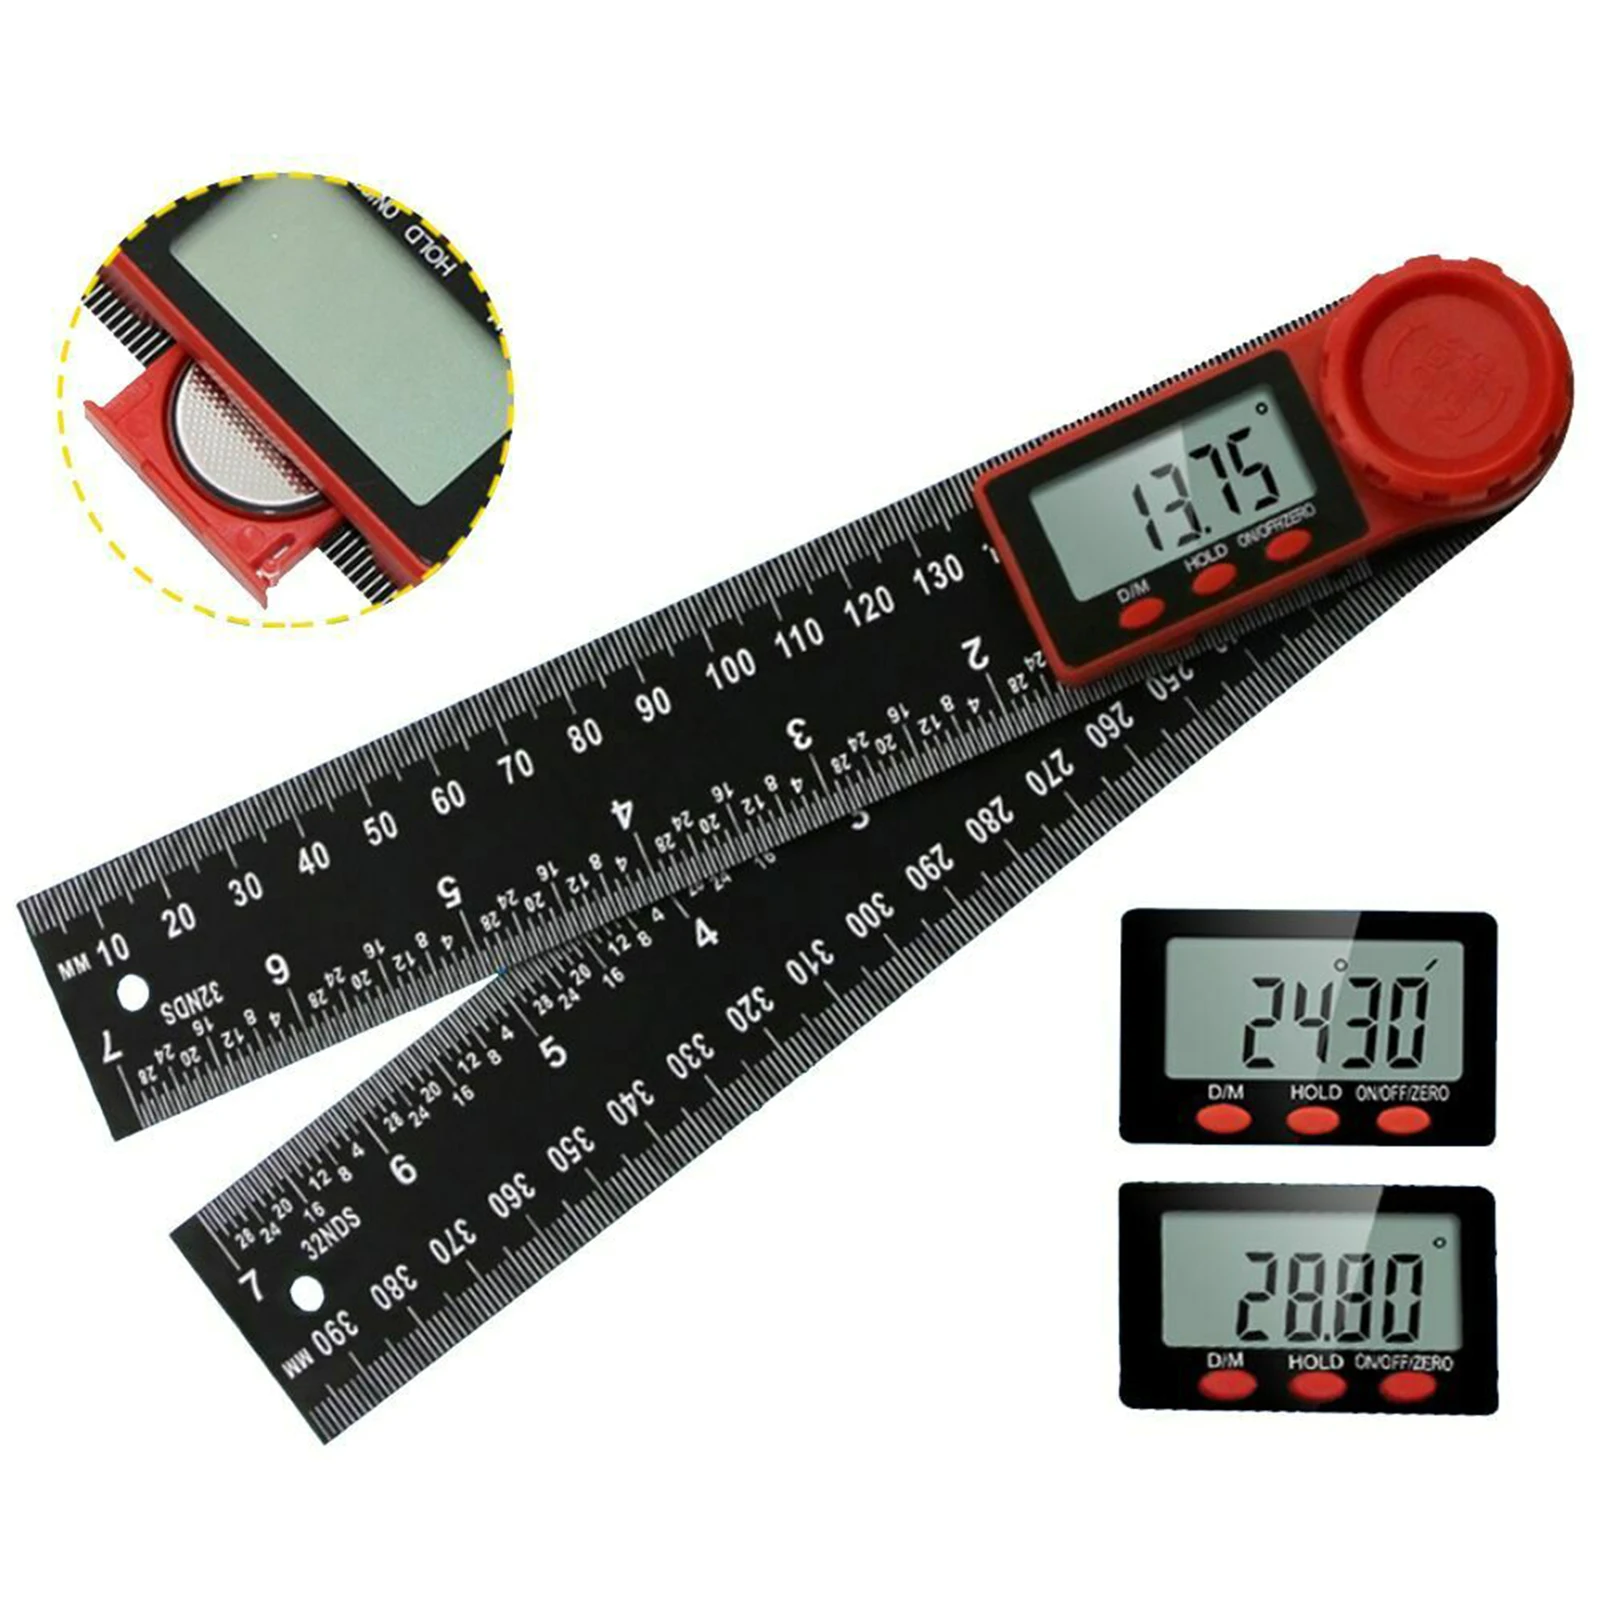 Digital Protractor Angle Finder Angle Meter Measure Ruler Tool 217mm 